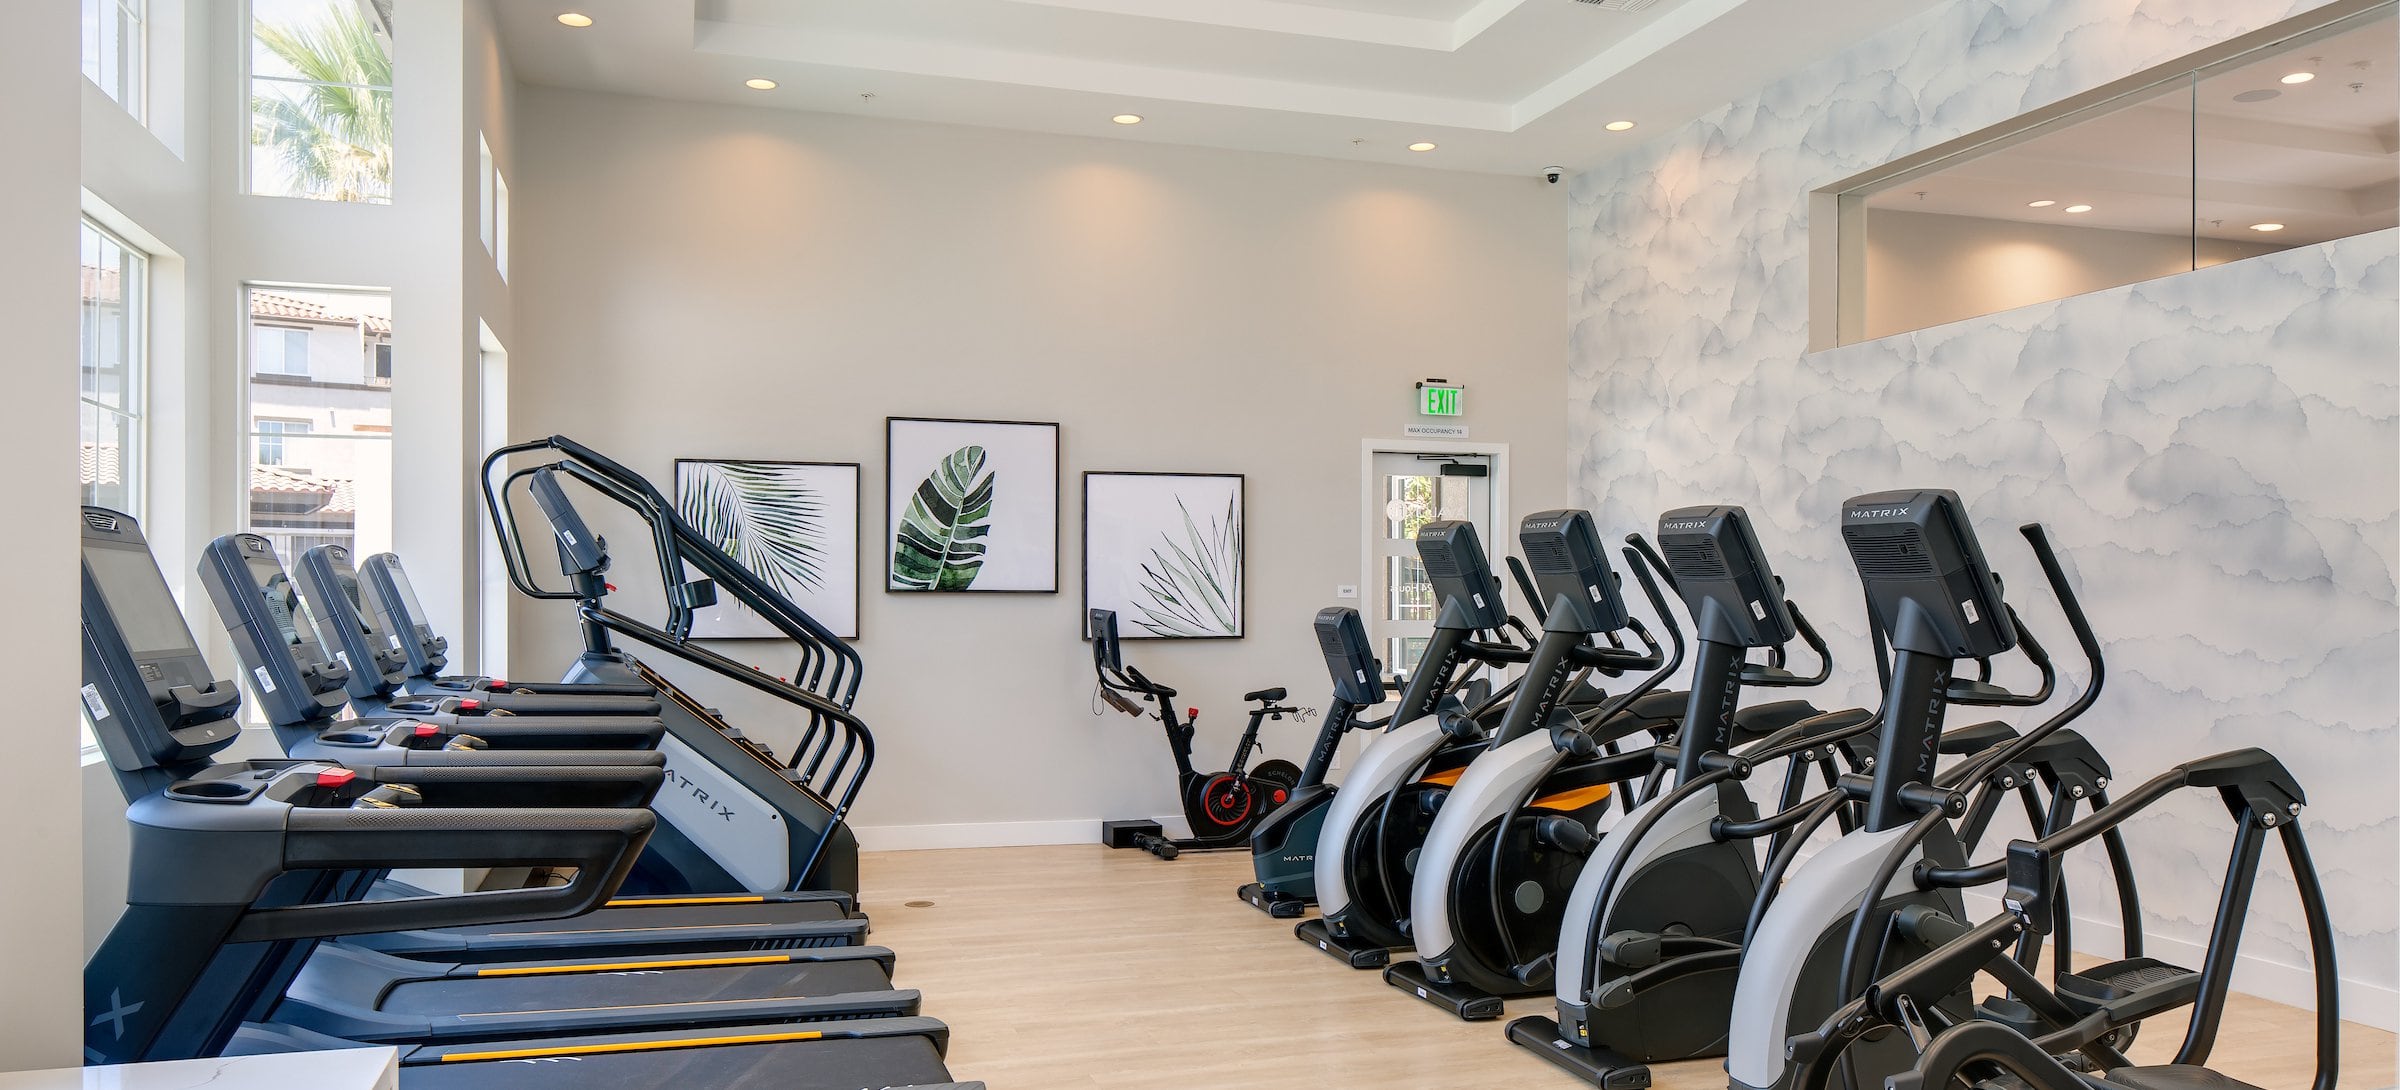 Fitness center with cardio and strength equipment